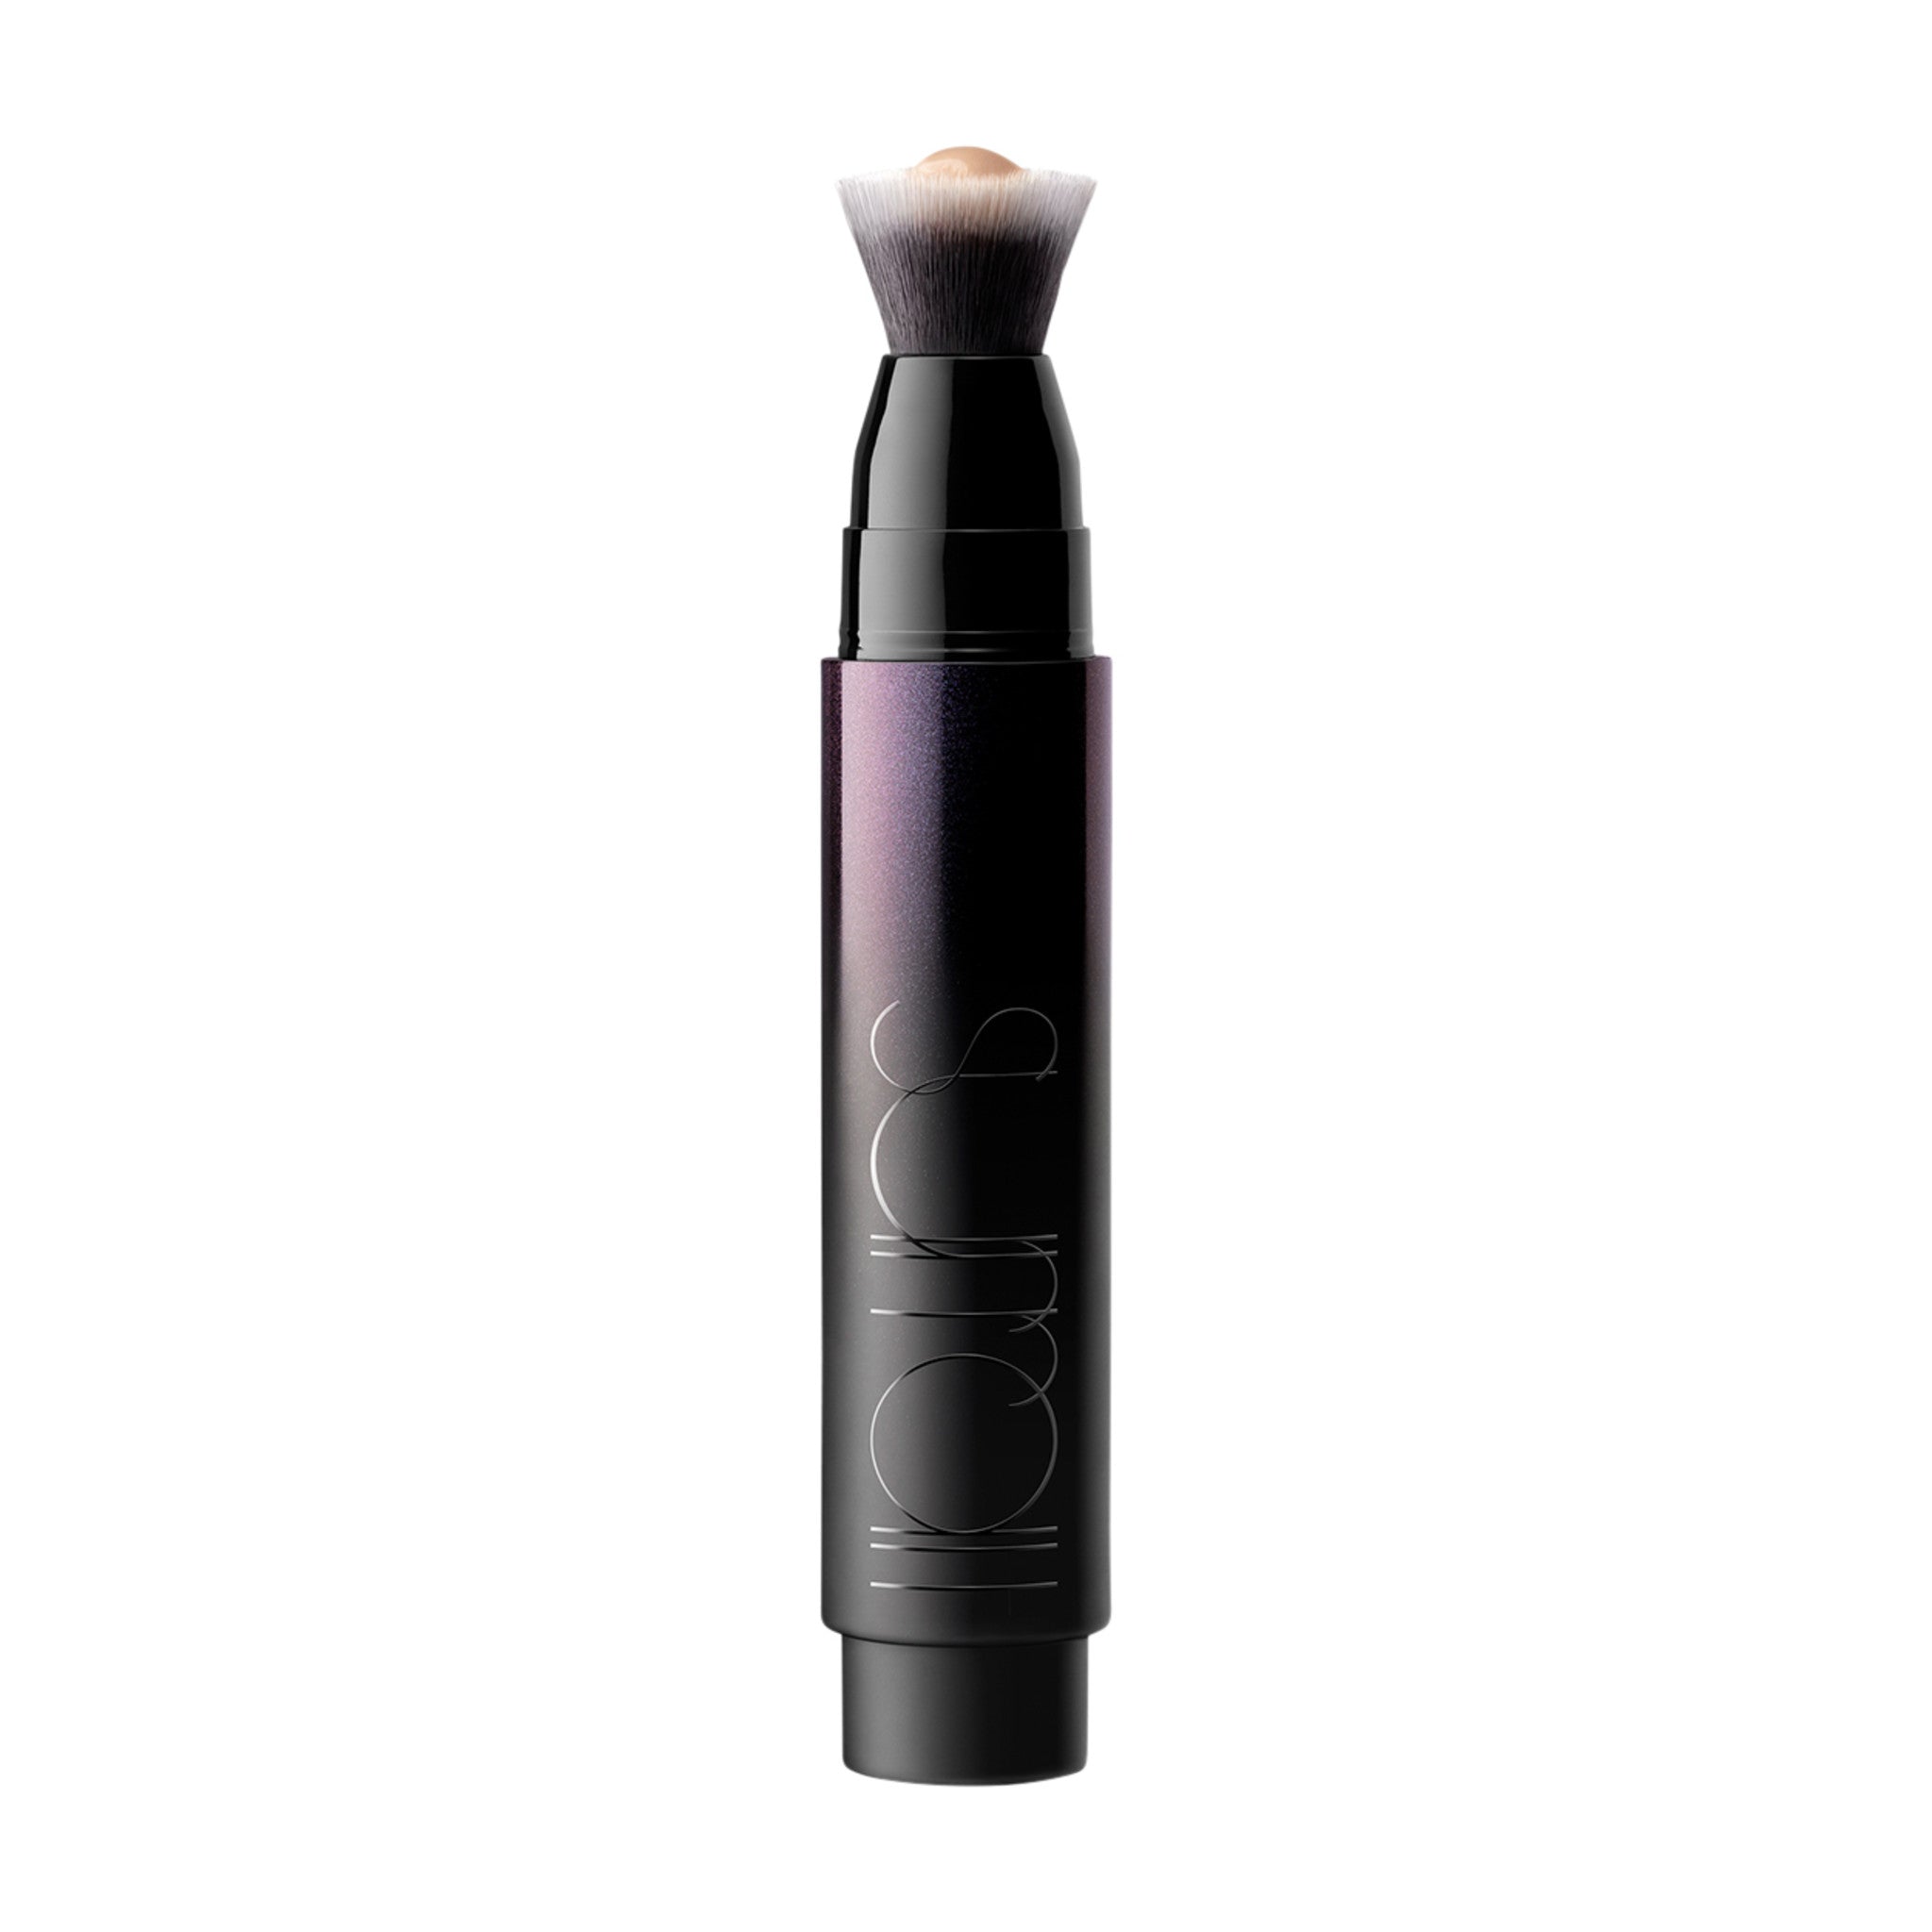 Surratt Surreal Skin Foundation Wand Color/Shade variant: 1 main image. This product is for light warm golden complexions